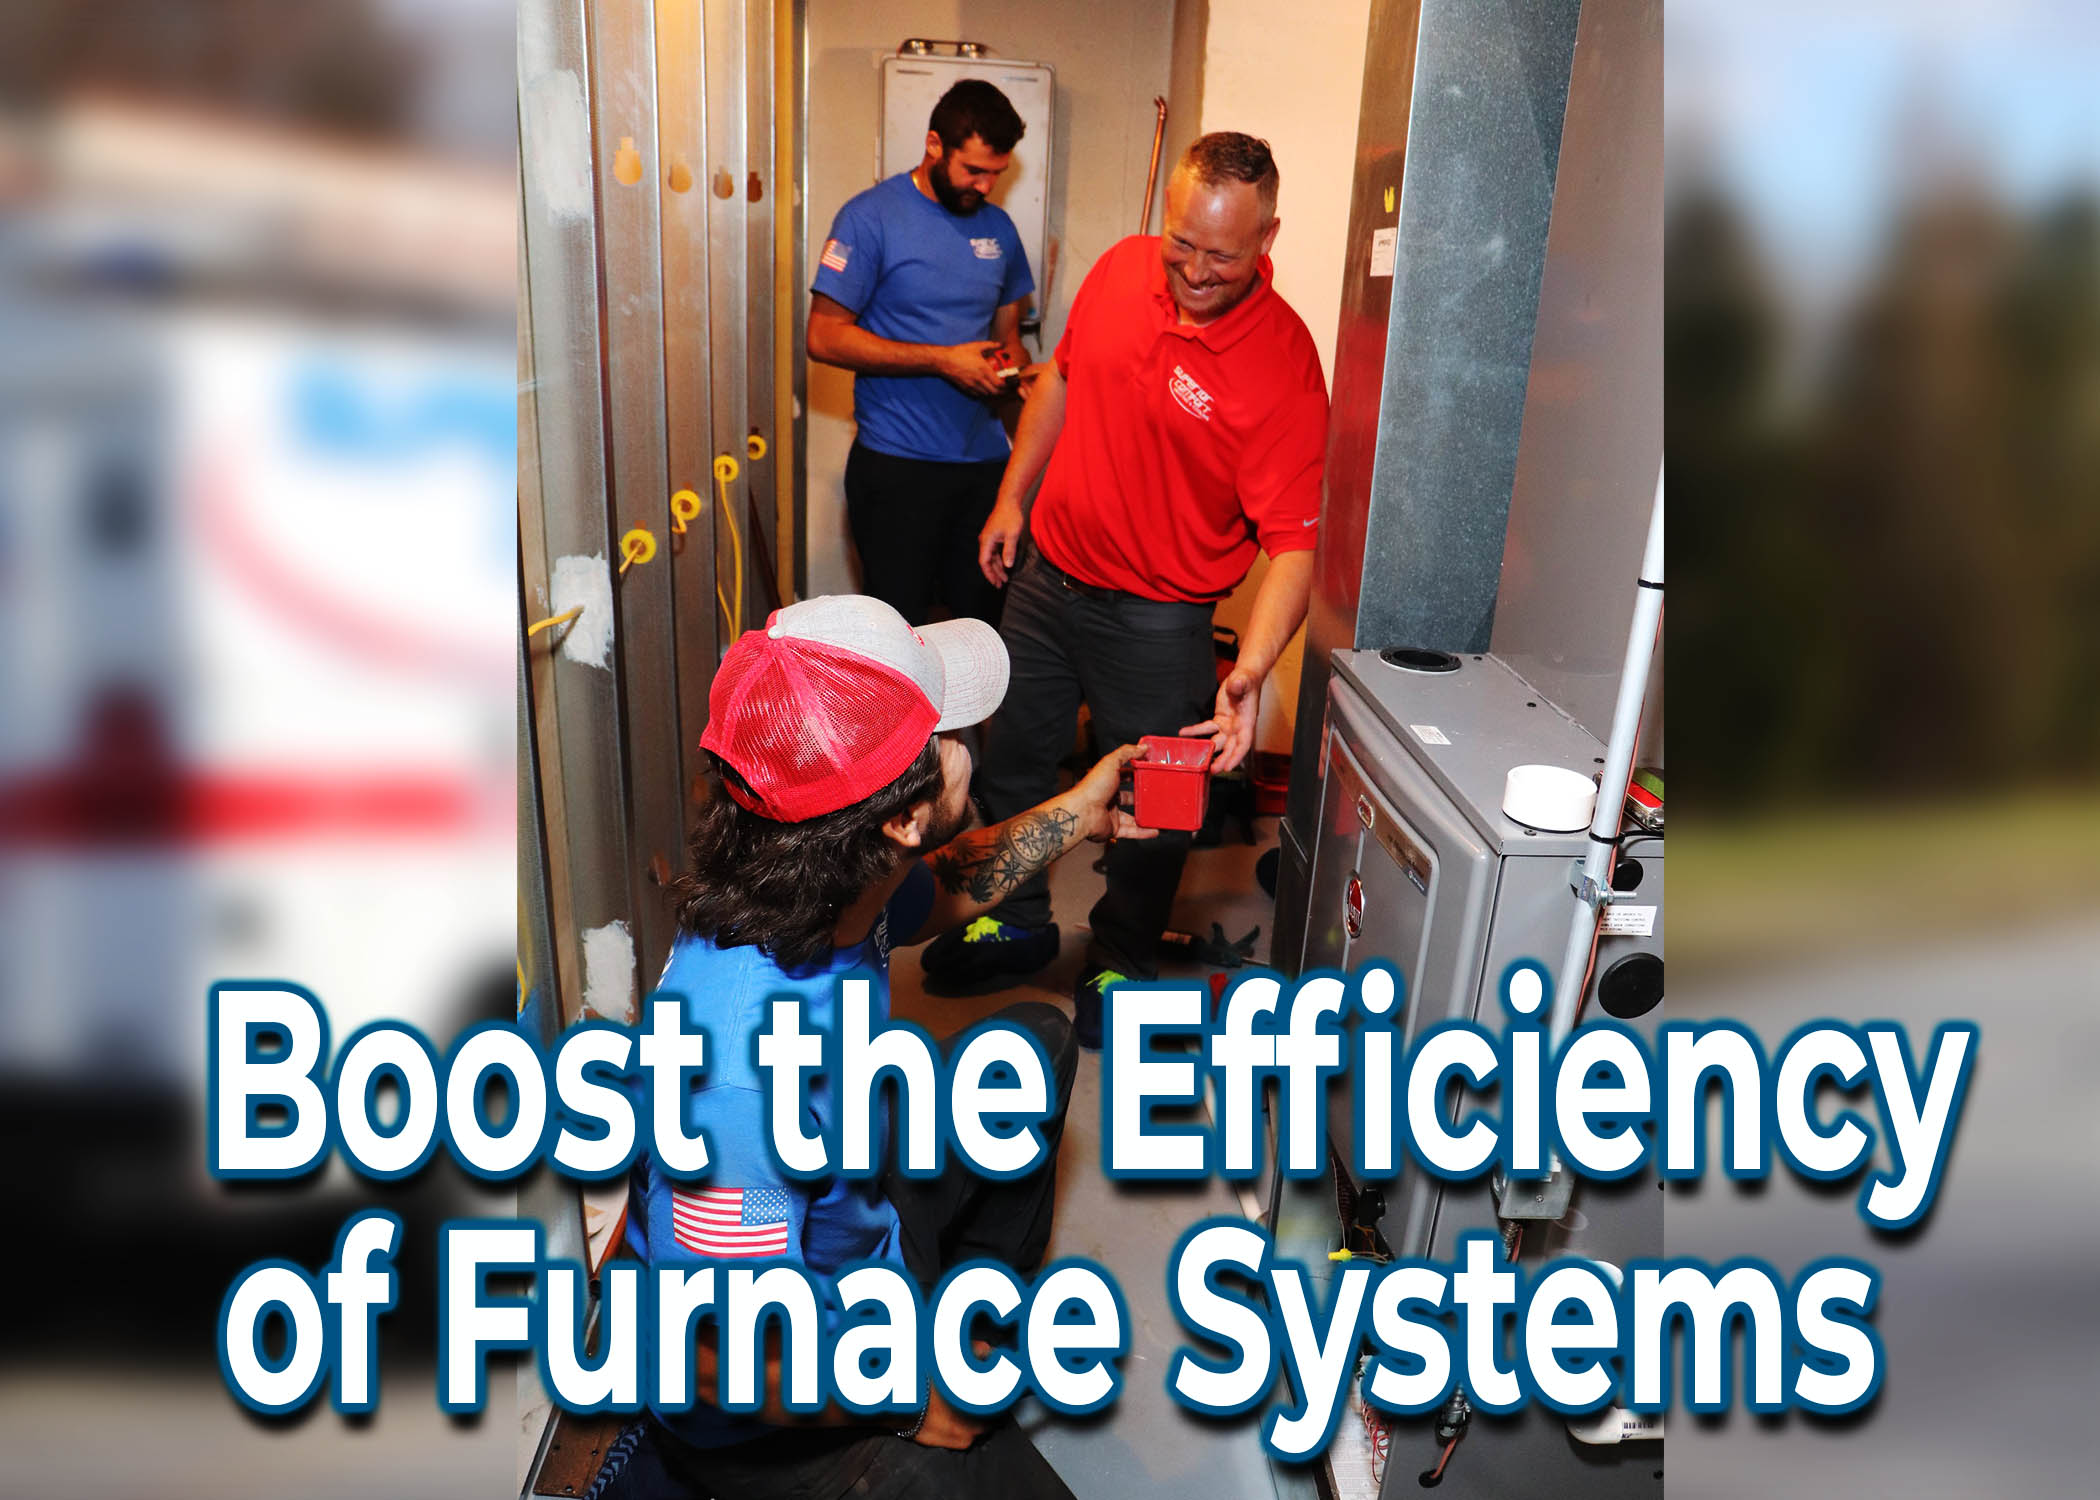 furnace systems